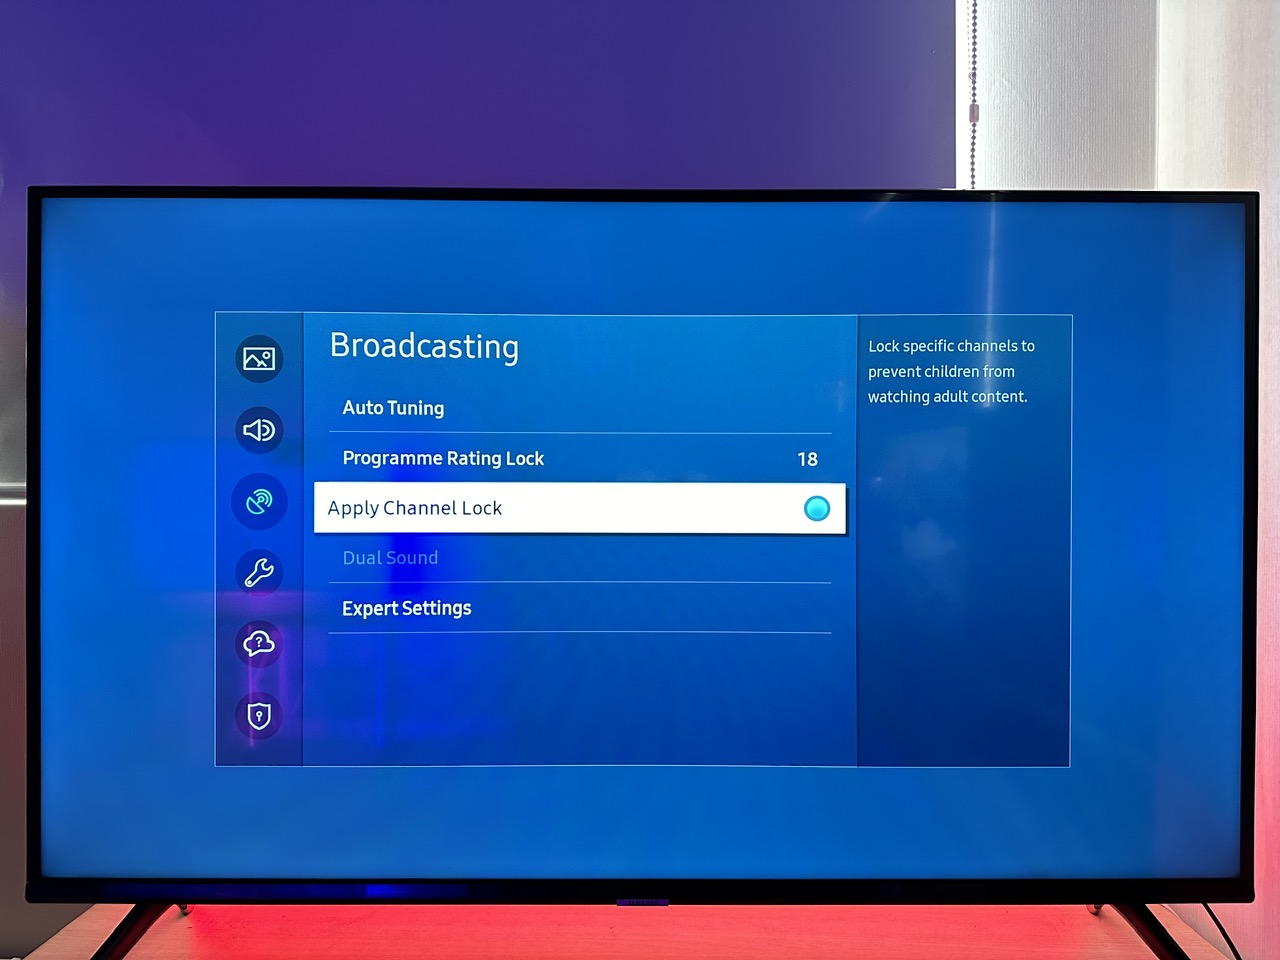 apply channel lock feature on a samsung tv is enabled